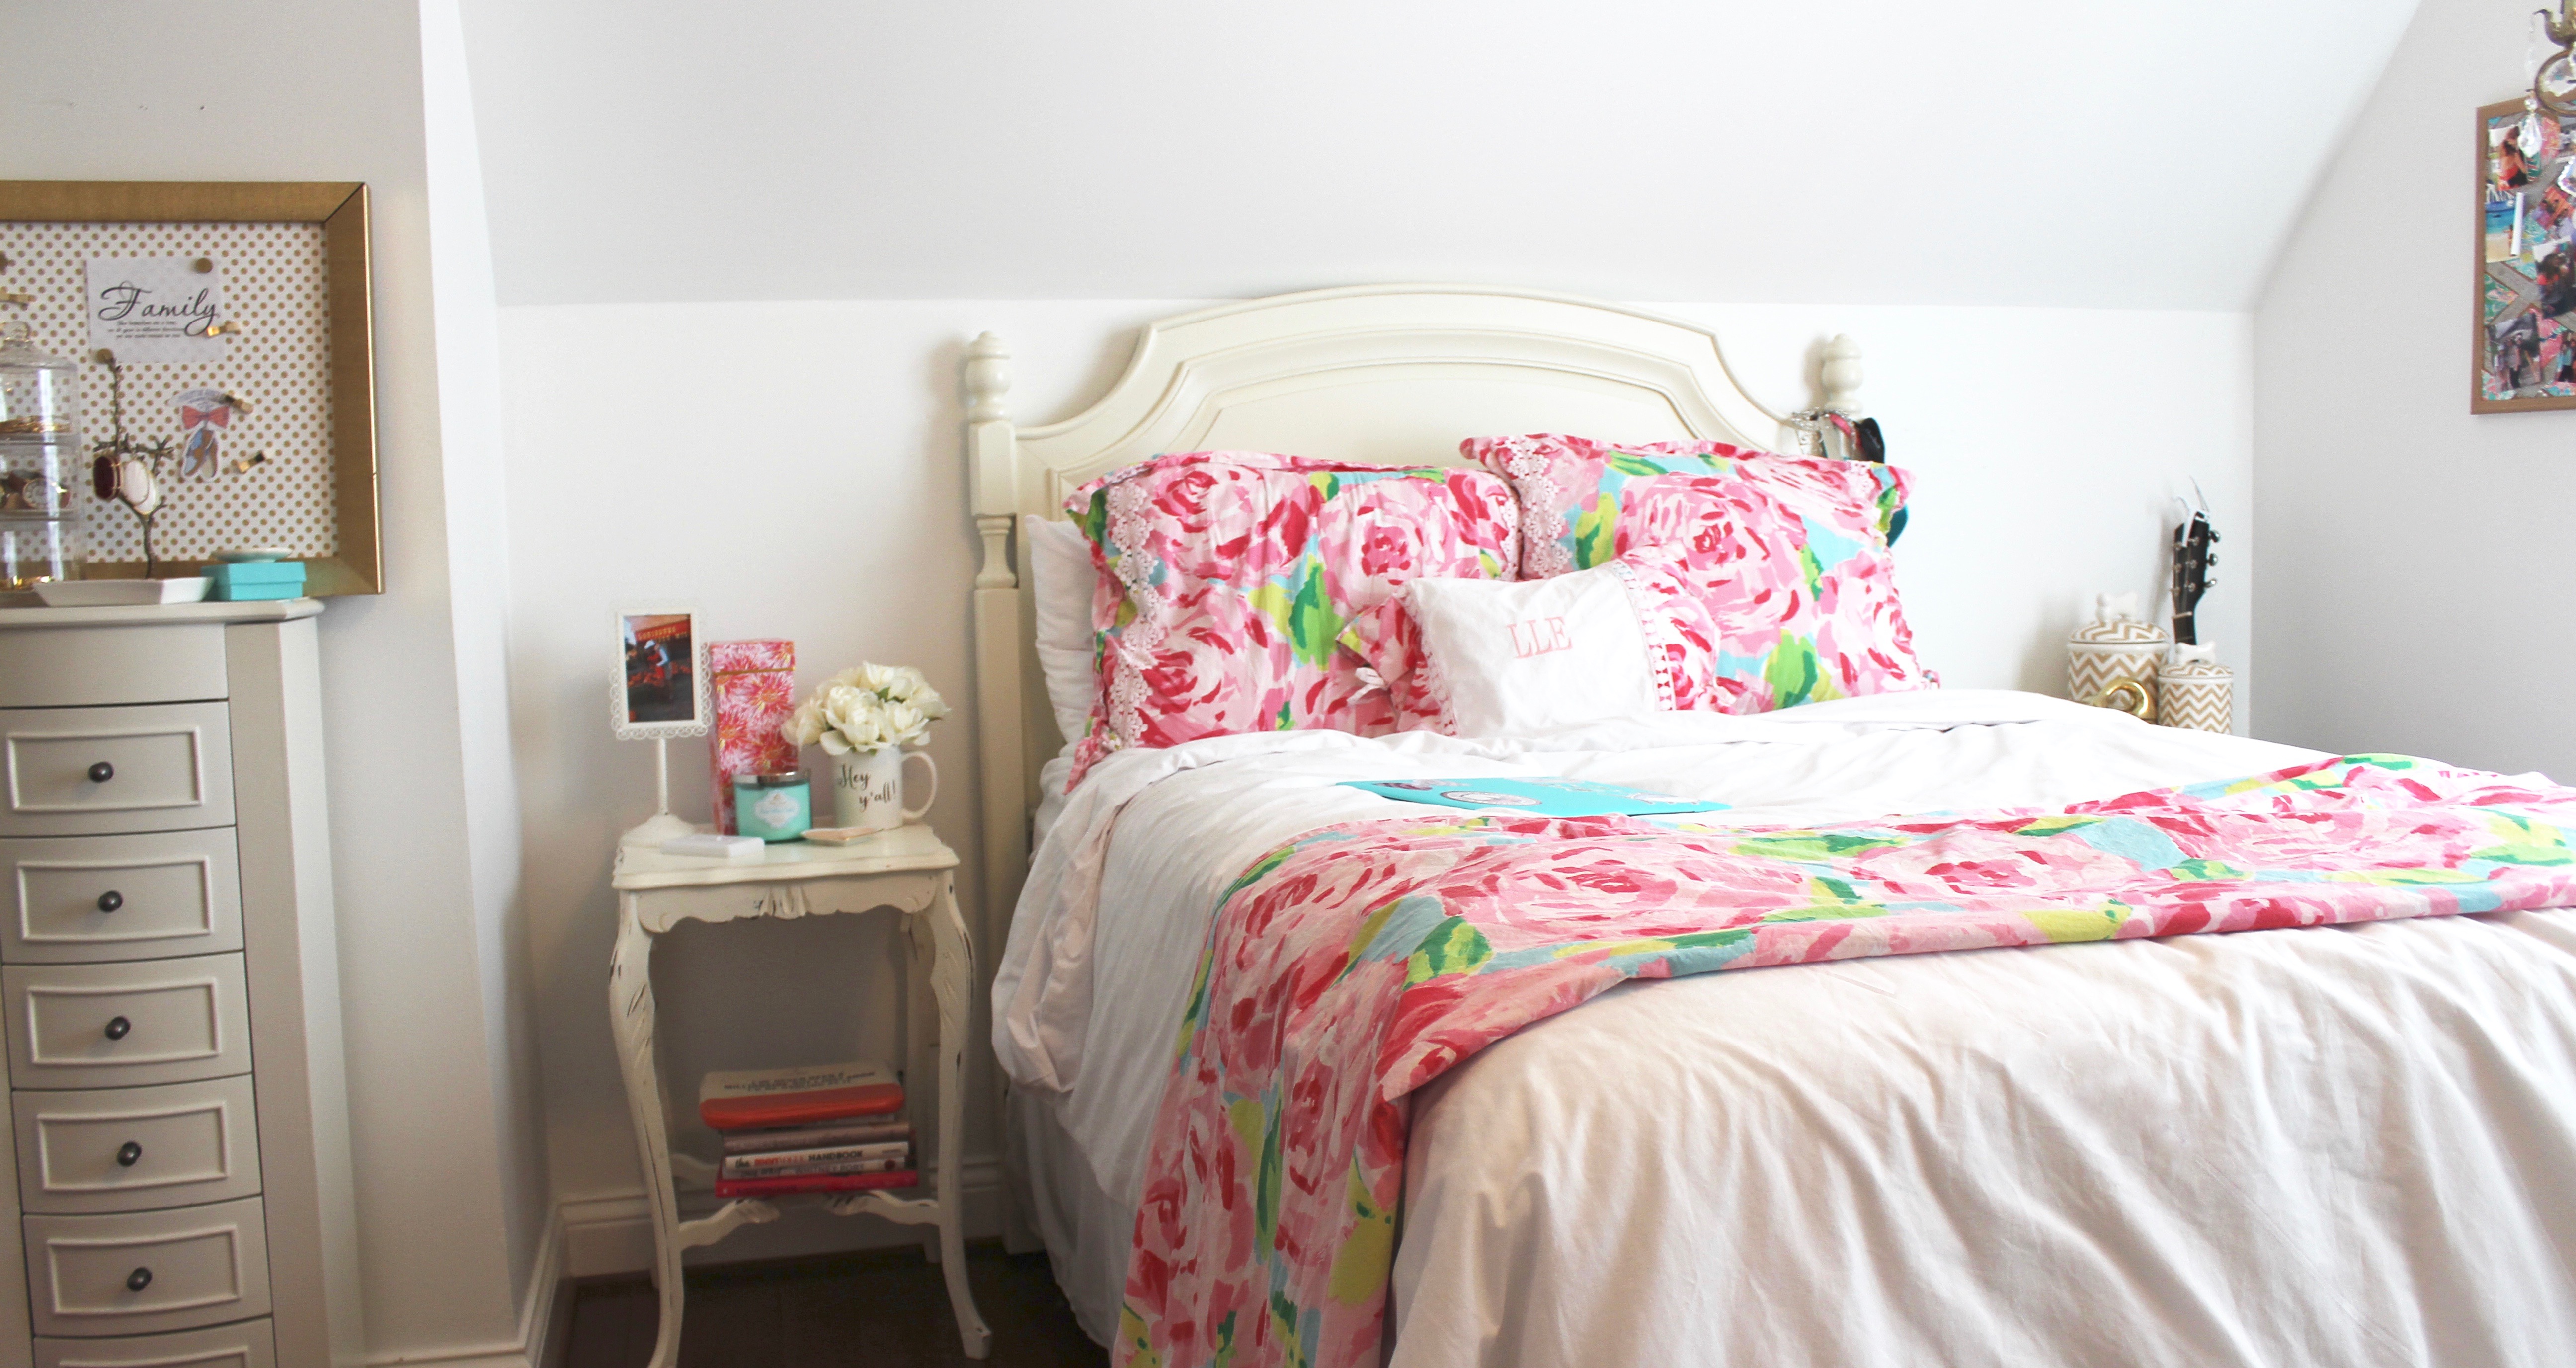 My Room Tour | VIDEO {Lilly Pulitzer Inspired Room}